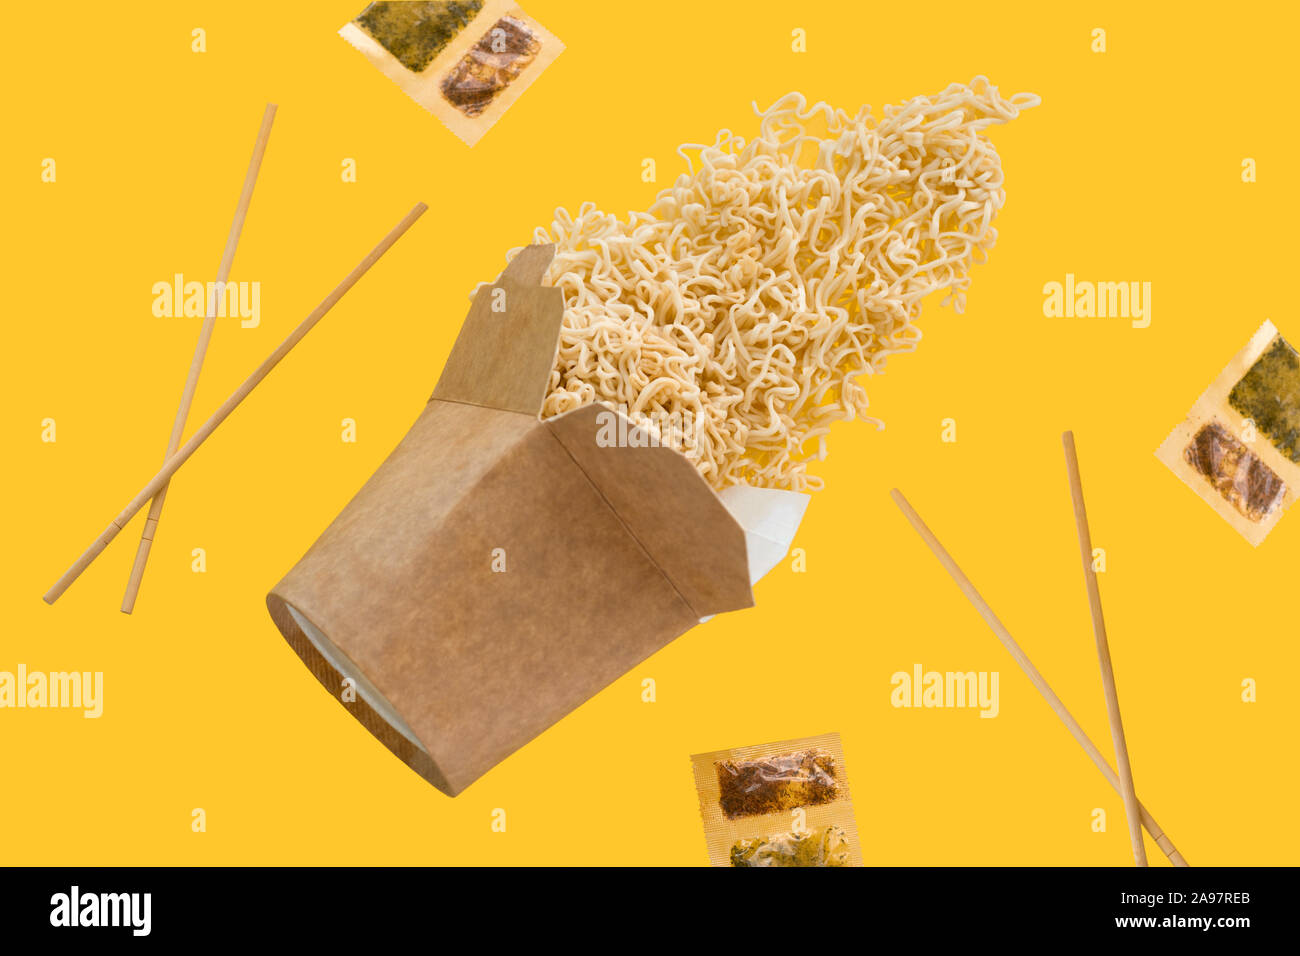 Download Flying On A Yellow Background Cardboard Box Wooden Sticks Dry Instant Noodles And A Packet Of Spices Asian Fast Food Levitating On A Yellow Backgro Stock Photo Alamy Yellowimages Mockups